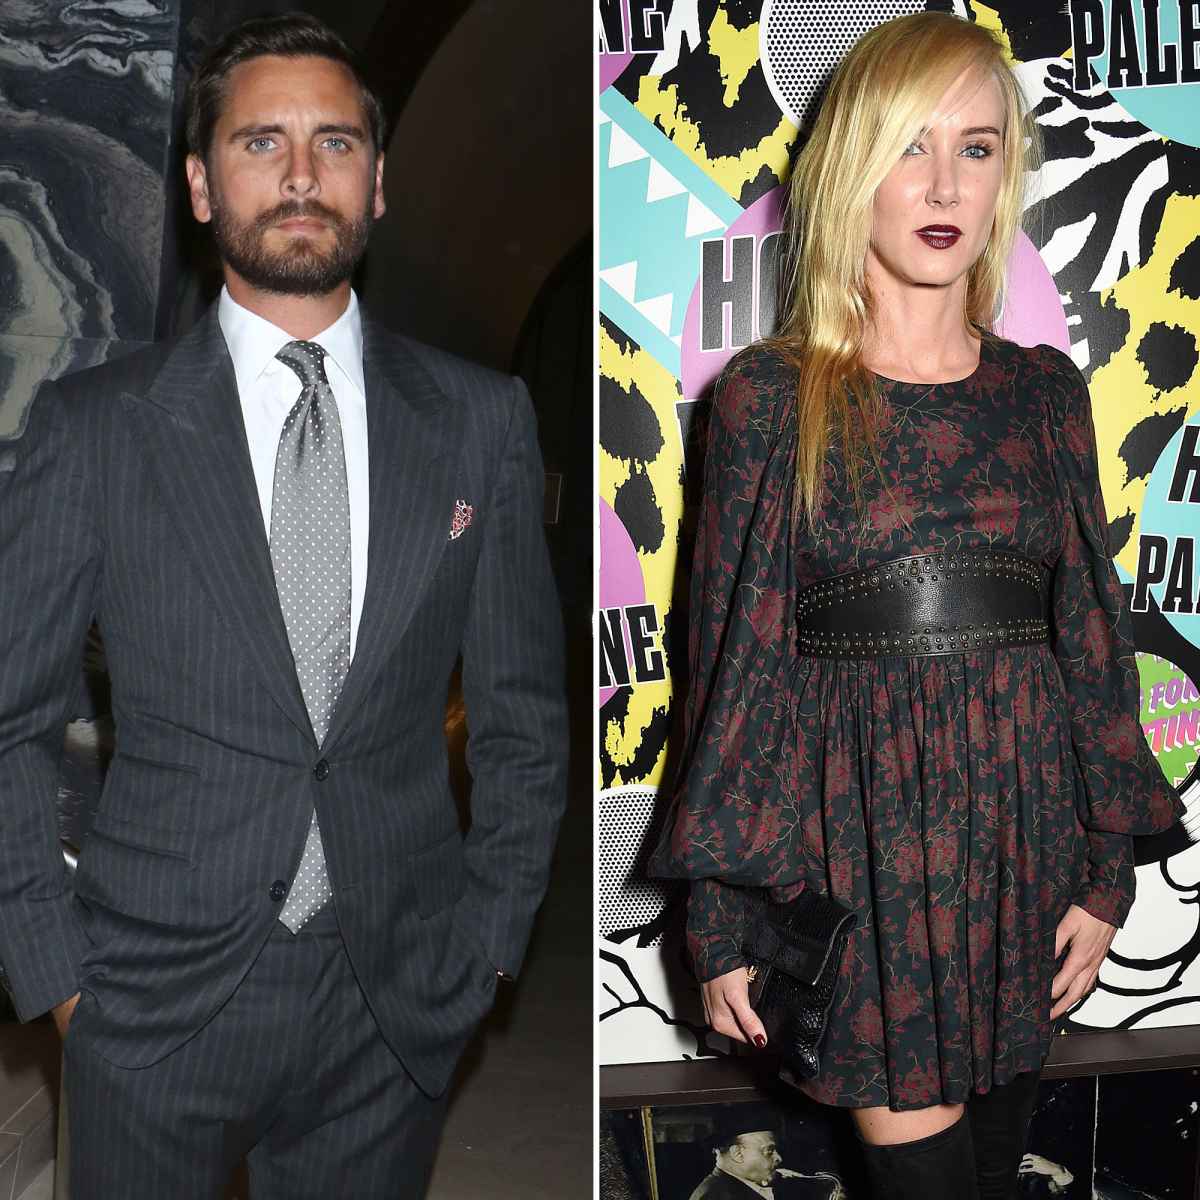 Scott Disick, Kimberly Stewart Have Been Dating for ‘Months'